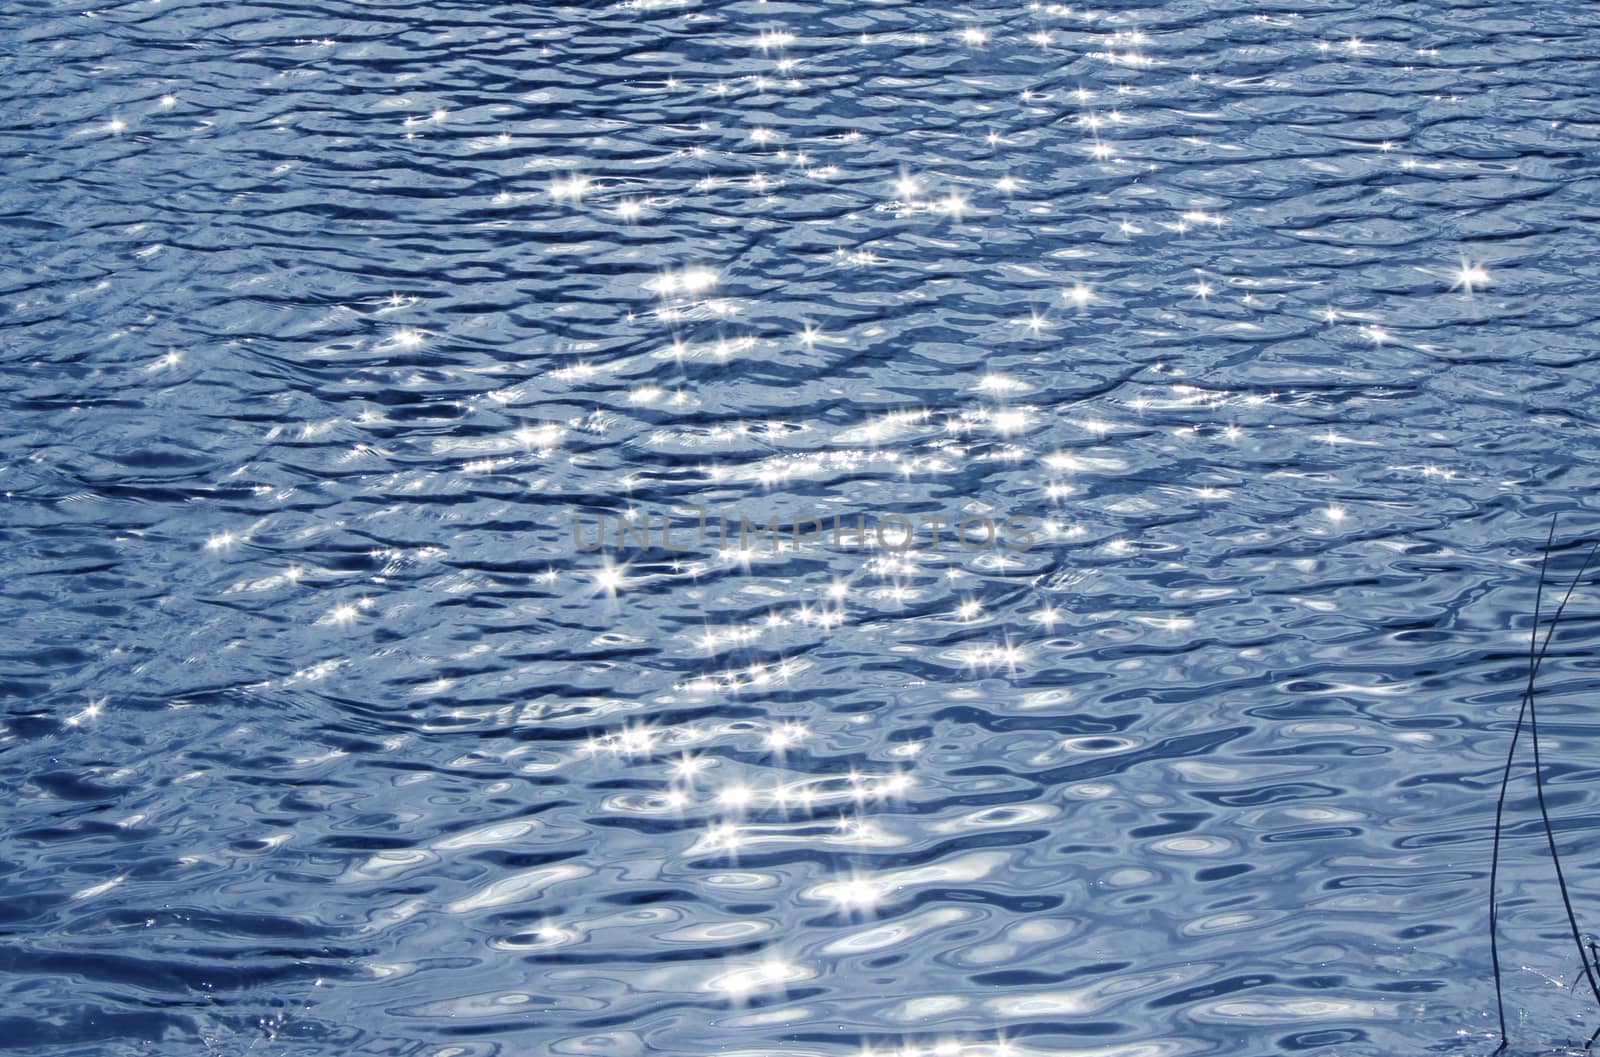 water surface in Karpin pond in which the sun is reflected. City Gatchina Leningrad Region, Russia.